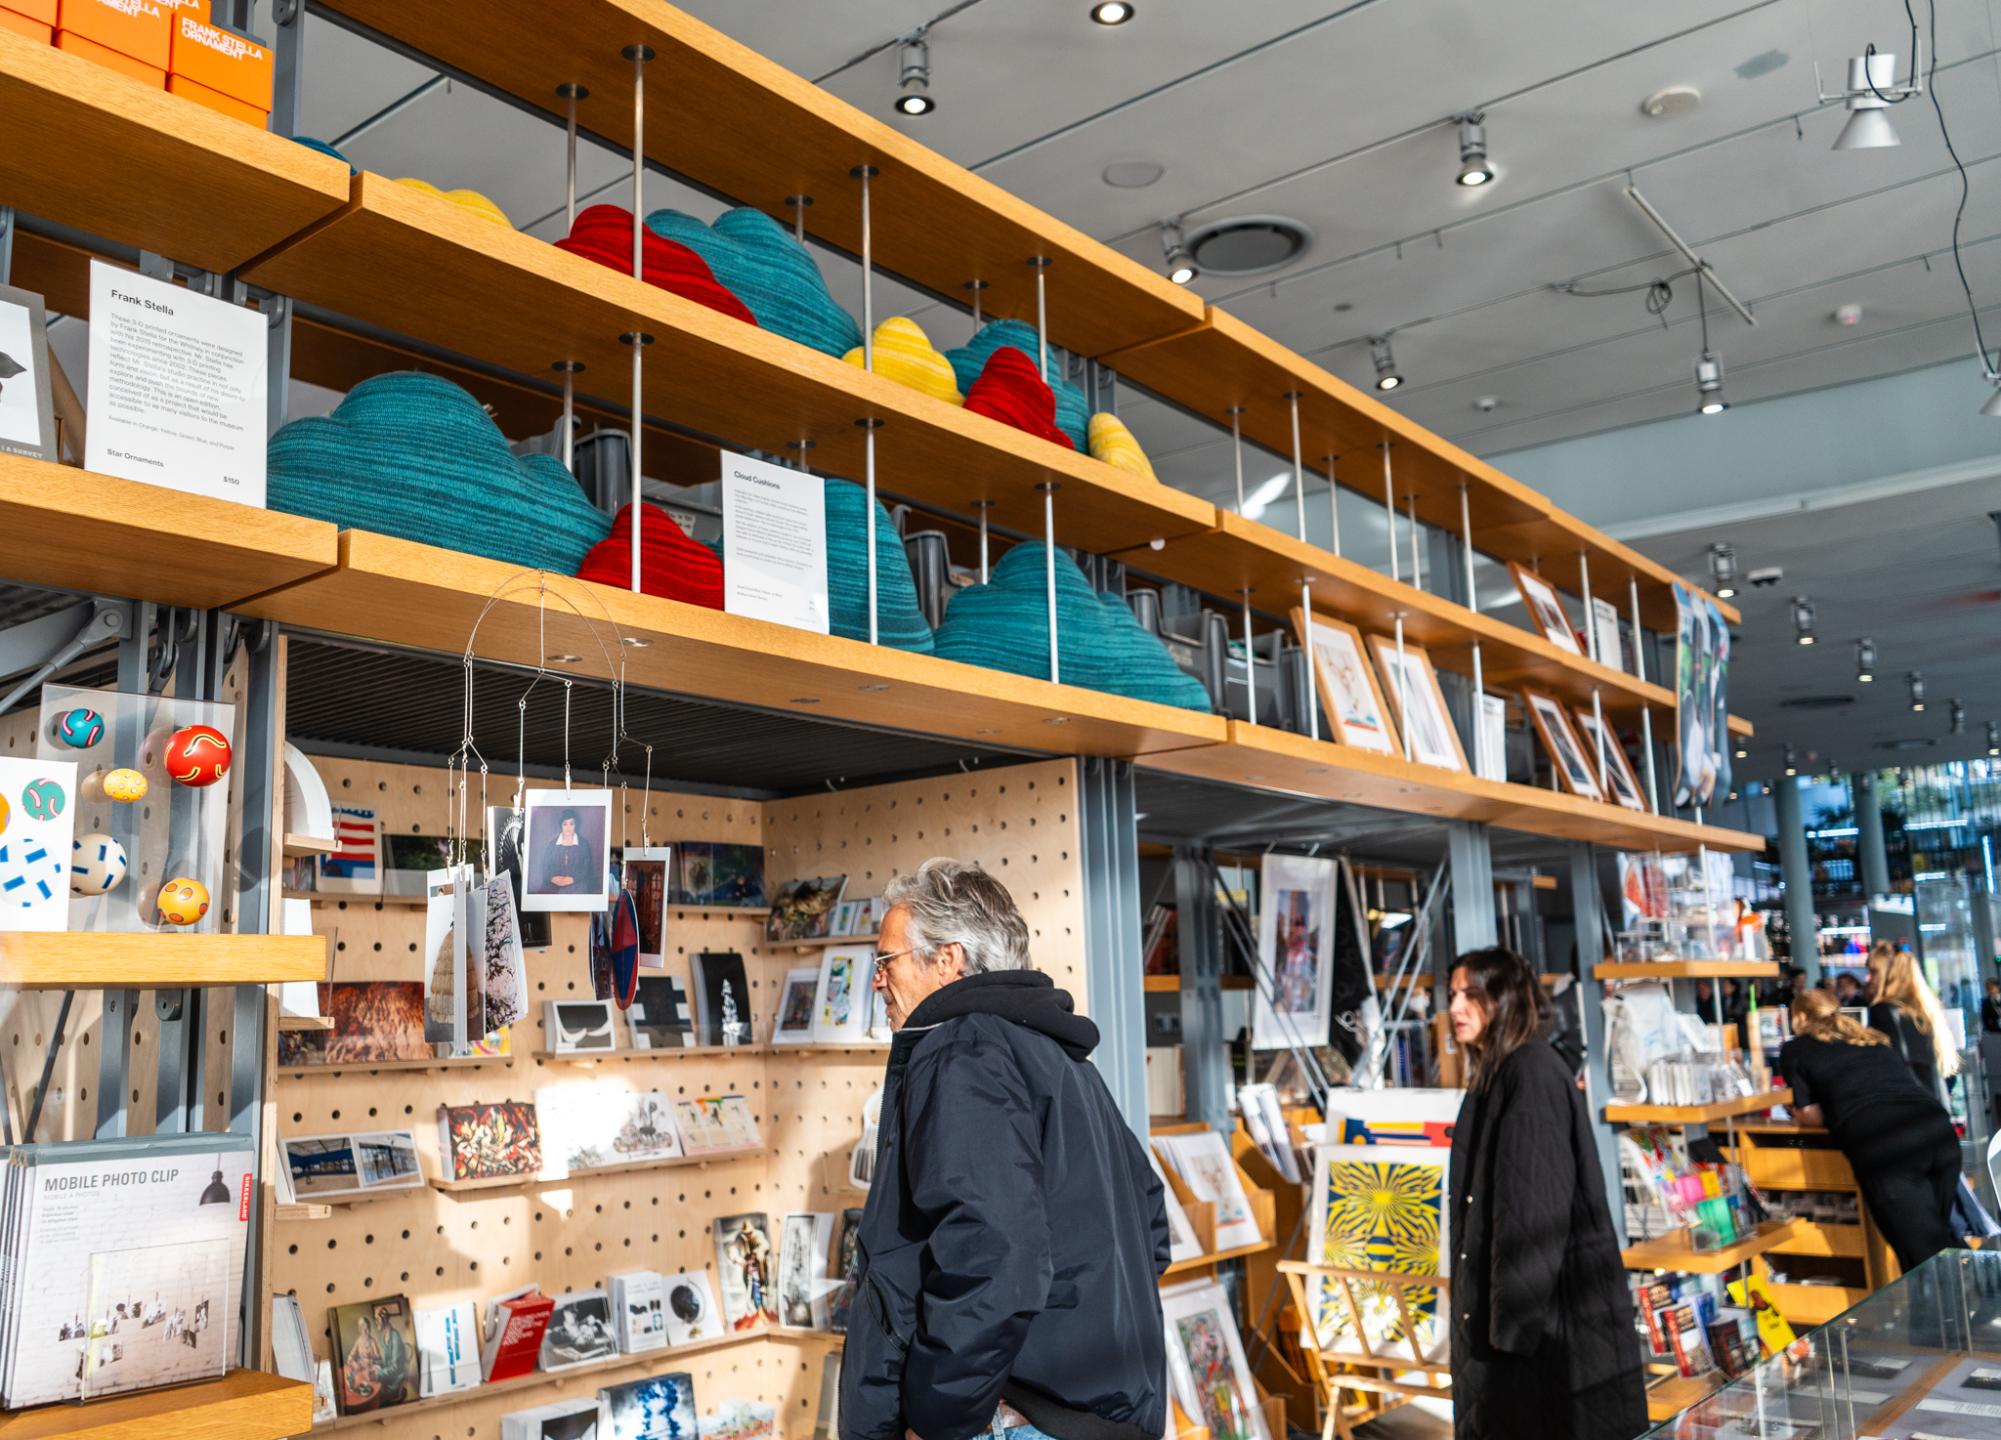 A visitor looking at the photographic art pieces available to purchase in the gift shop of the Whitney Museum of American Art.